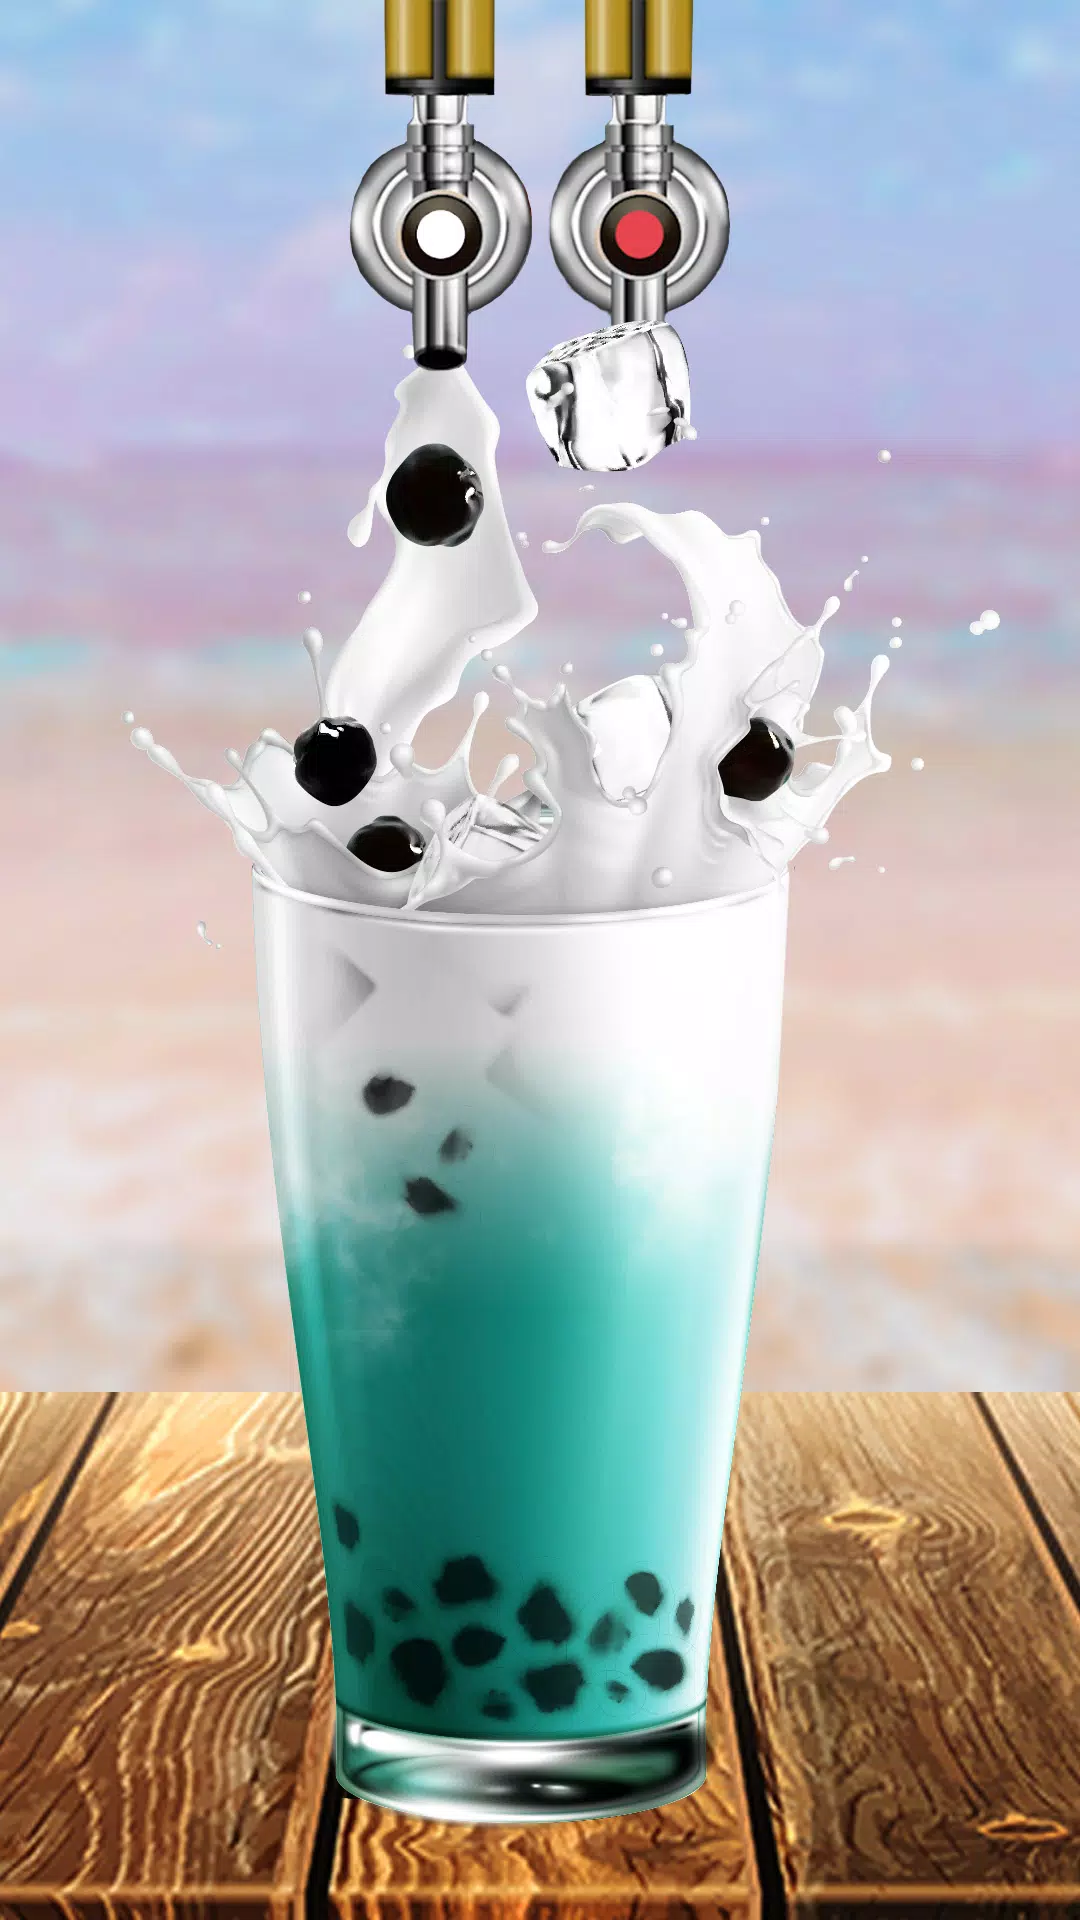 Boba Flow: Bubble Tea Mixology for Android - Free App Download